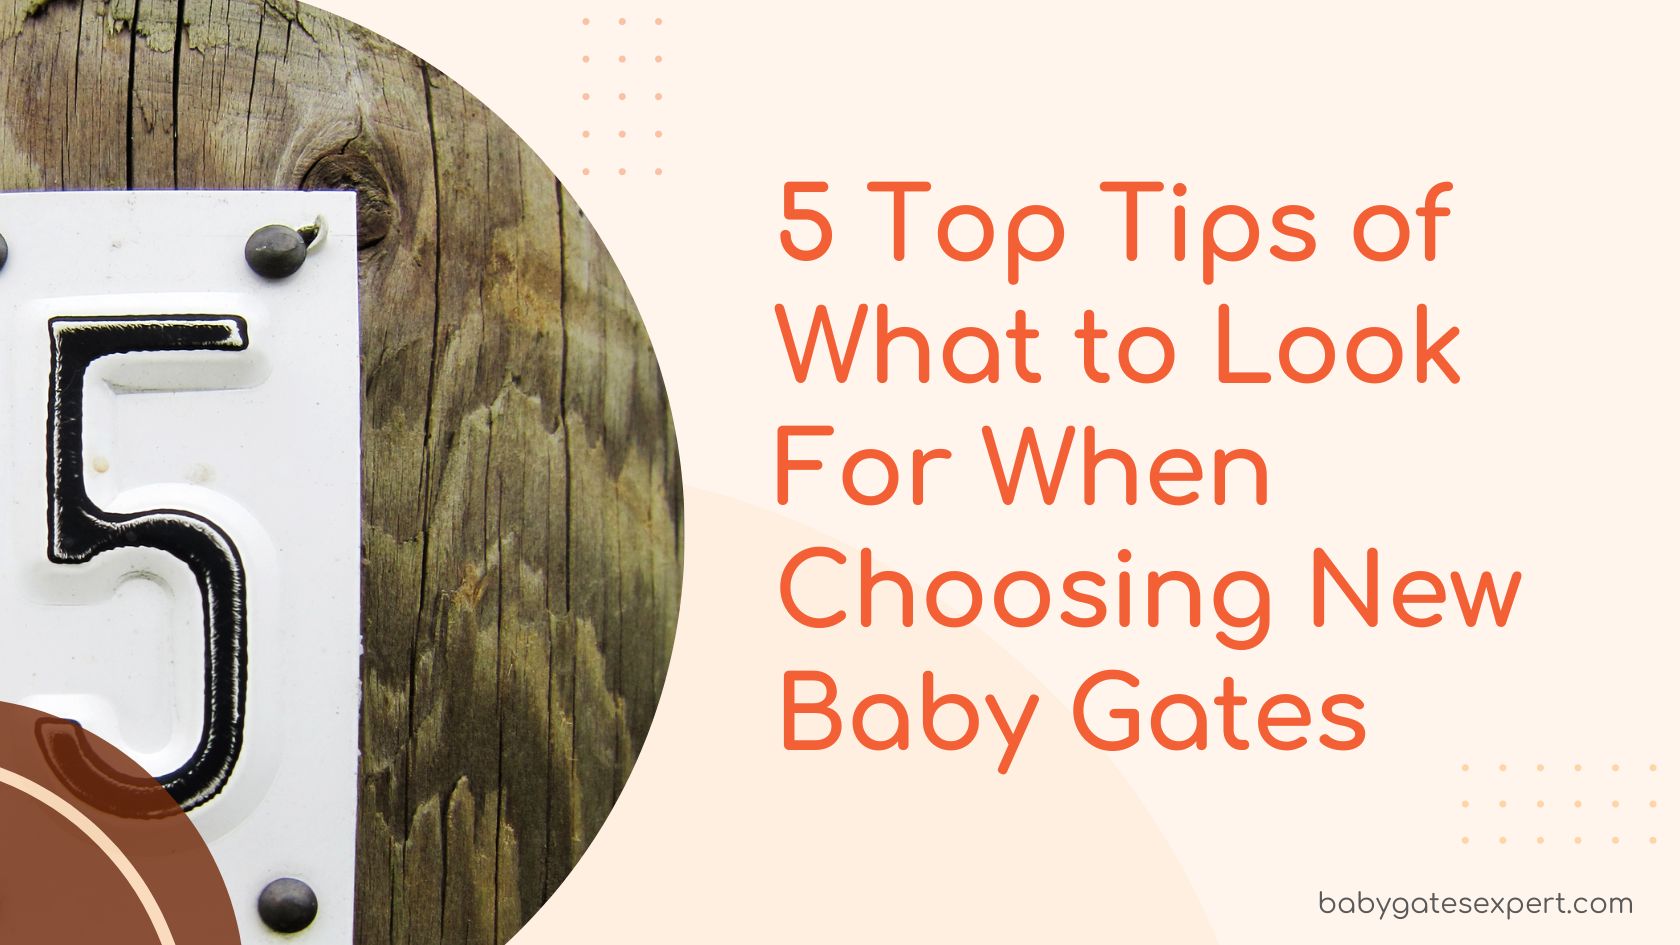 5 Top Tips of What to Look For When Choosing New Baby Gates